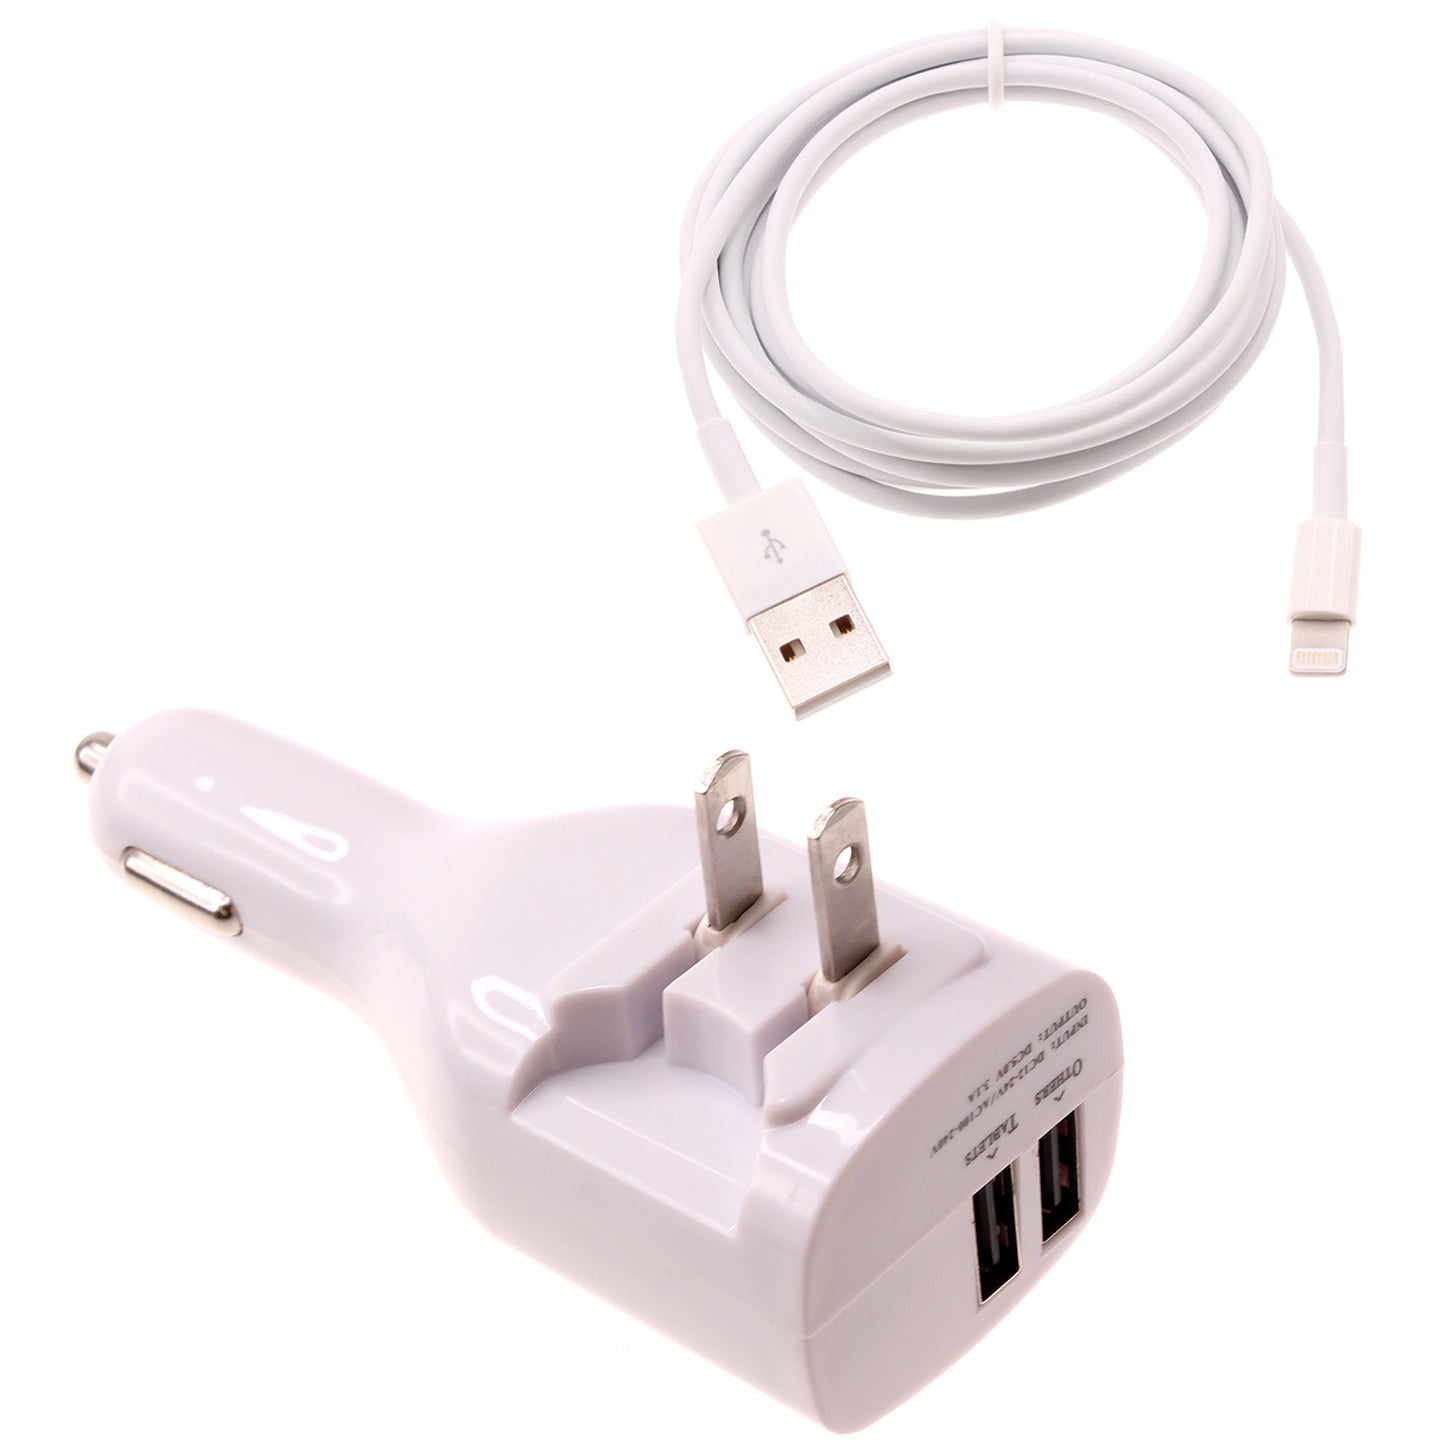 2-in-1 Car Home Charger 6ft Long USB Cable Power Cord Travel Adapter Charging Wire Folding Prongs - ONY13